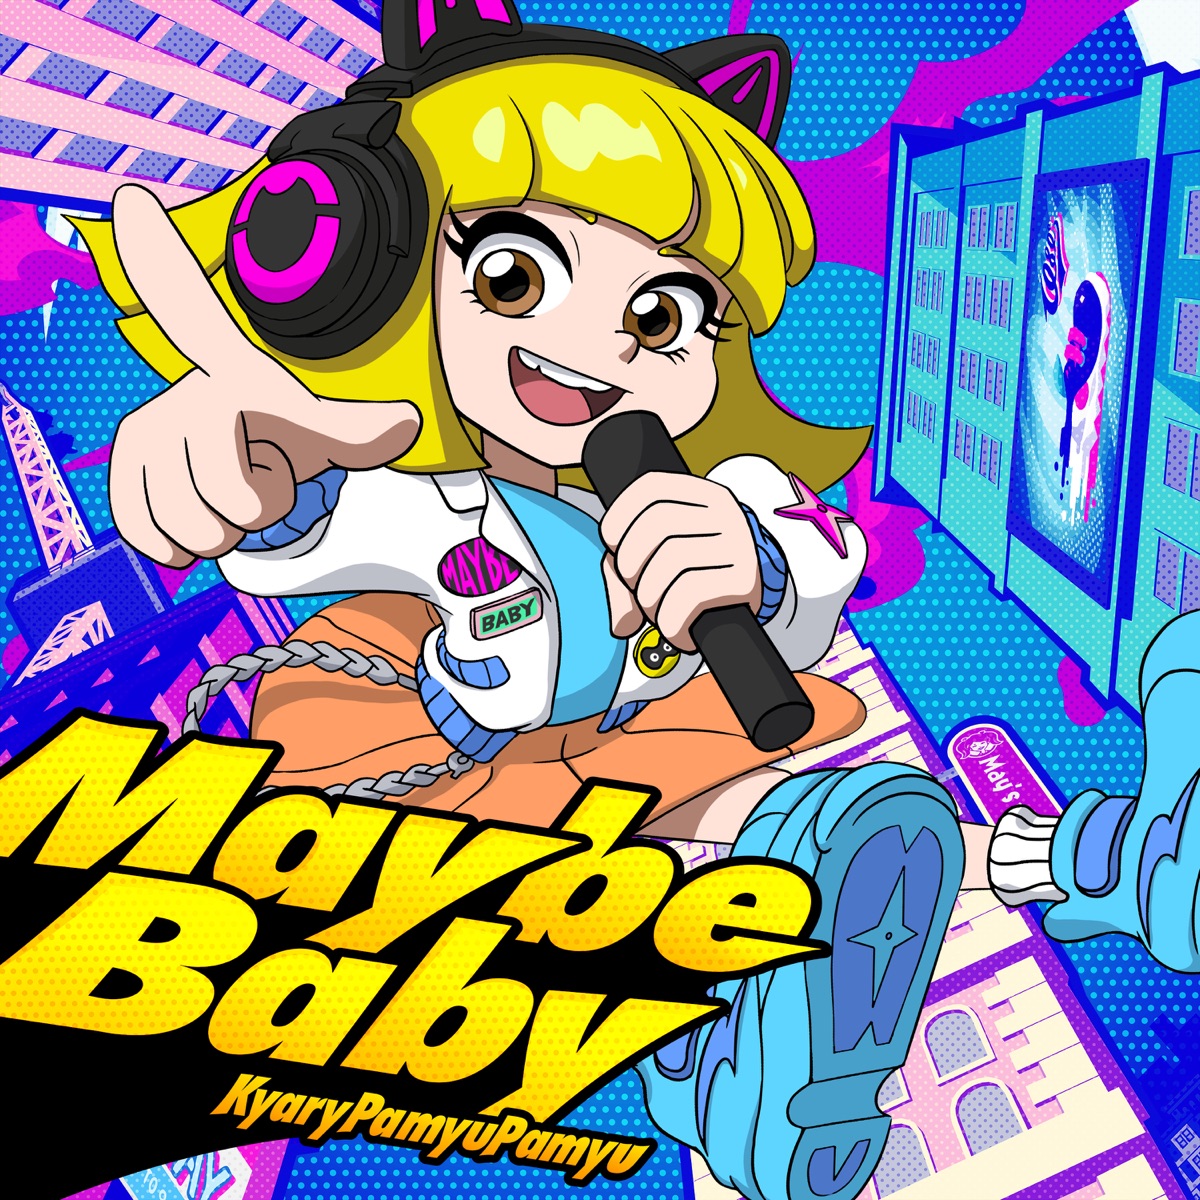 Cover art for『Kyary Pamyu Pamyu - メイビーベイビー』from the release『Maybe Baby